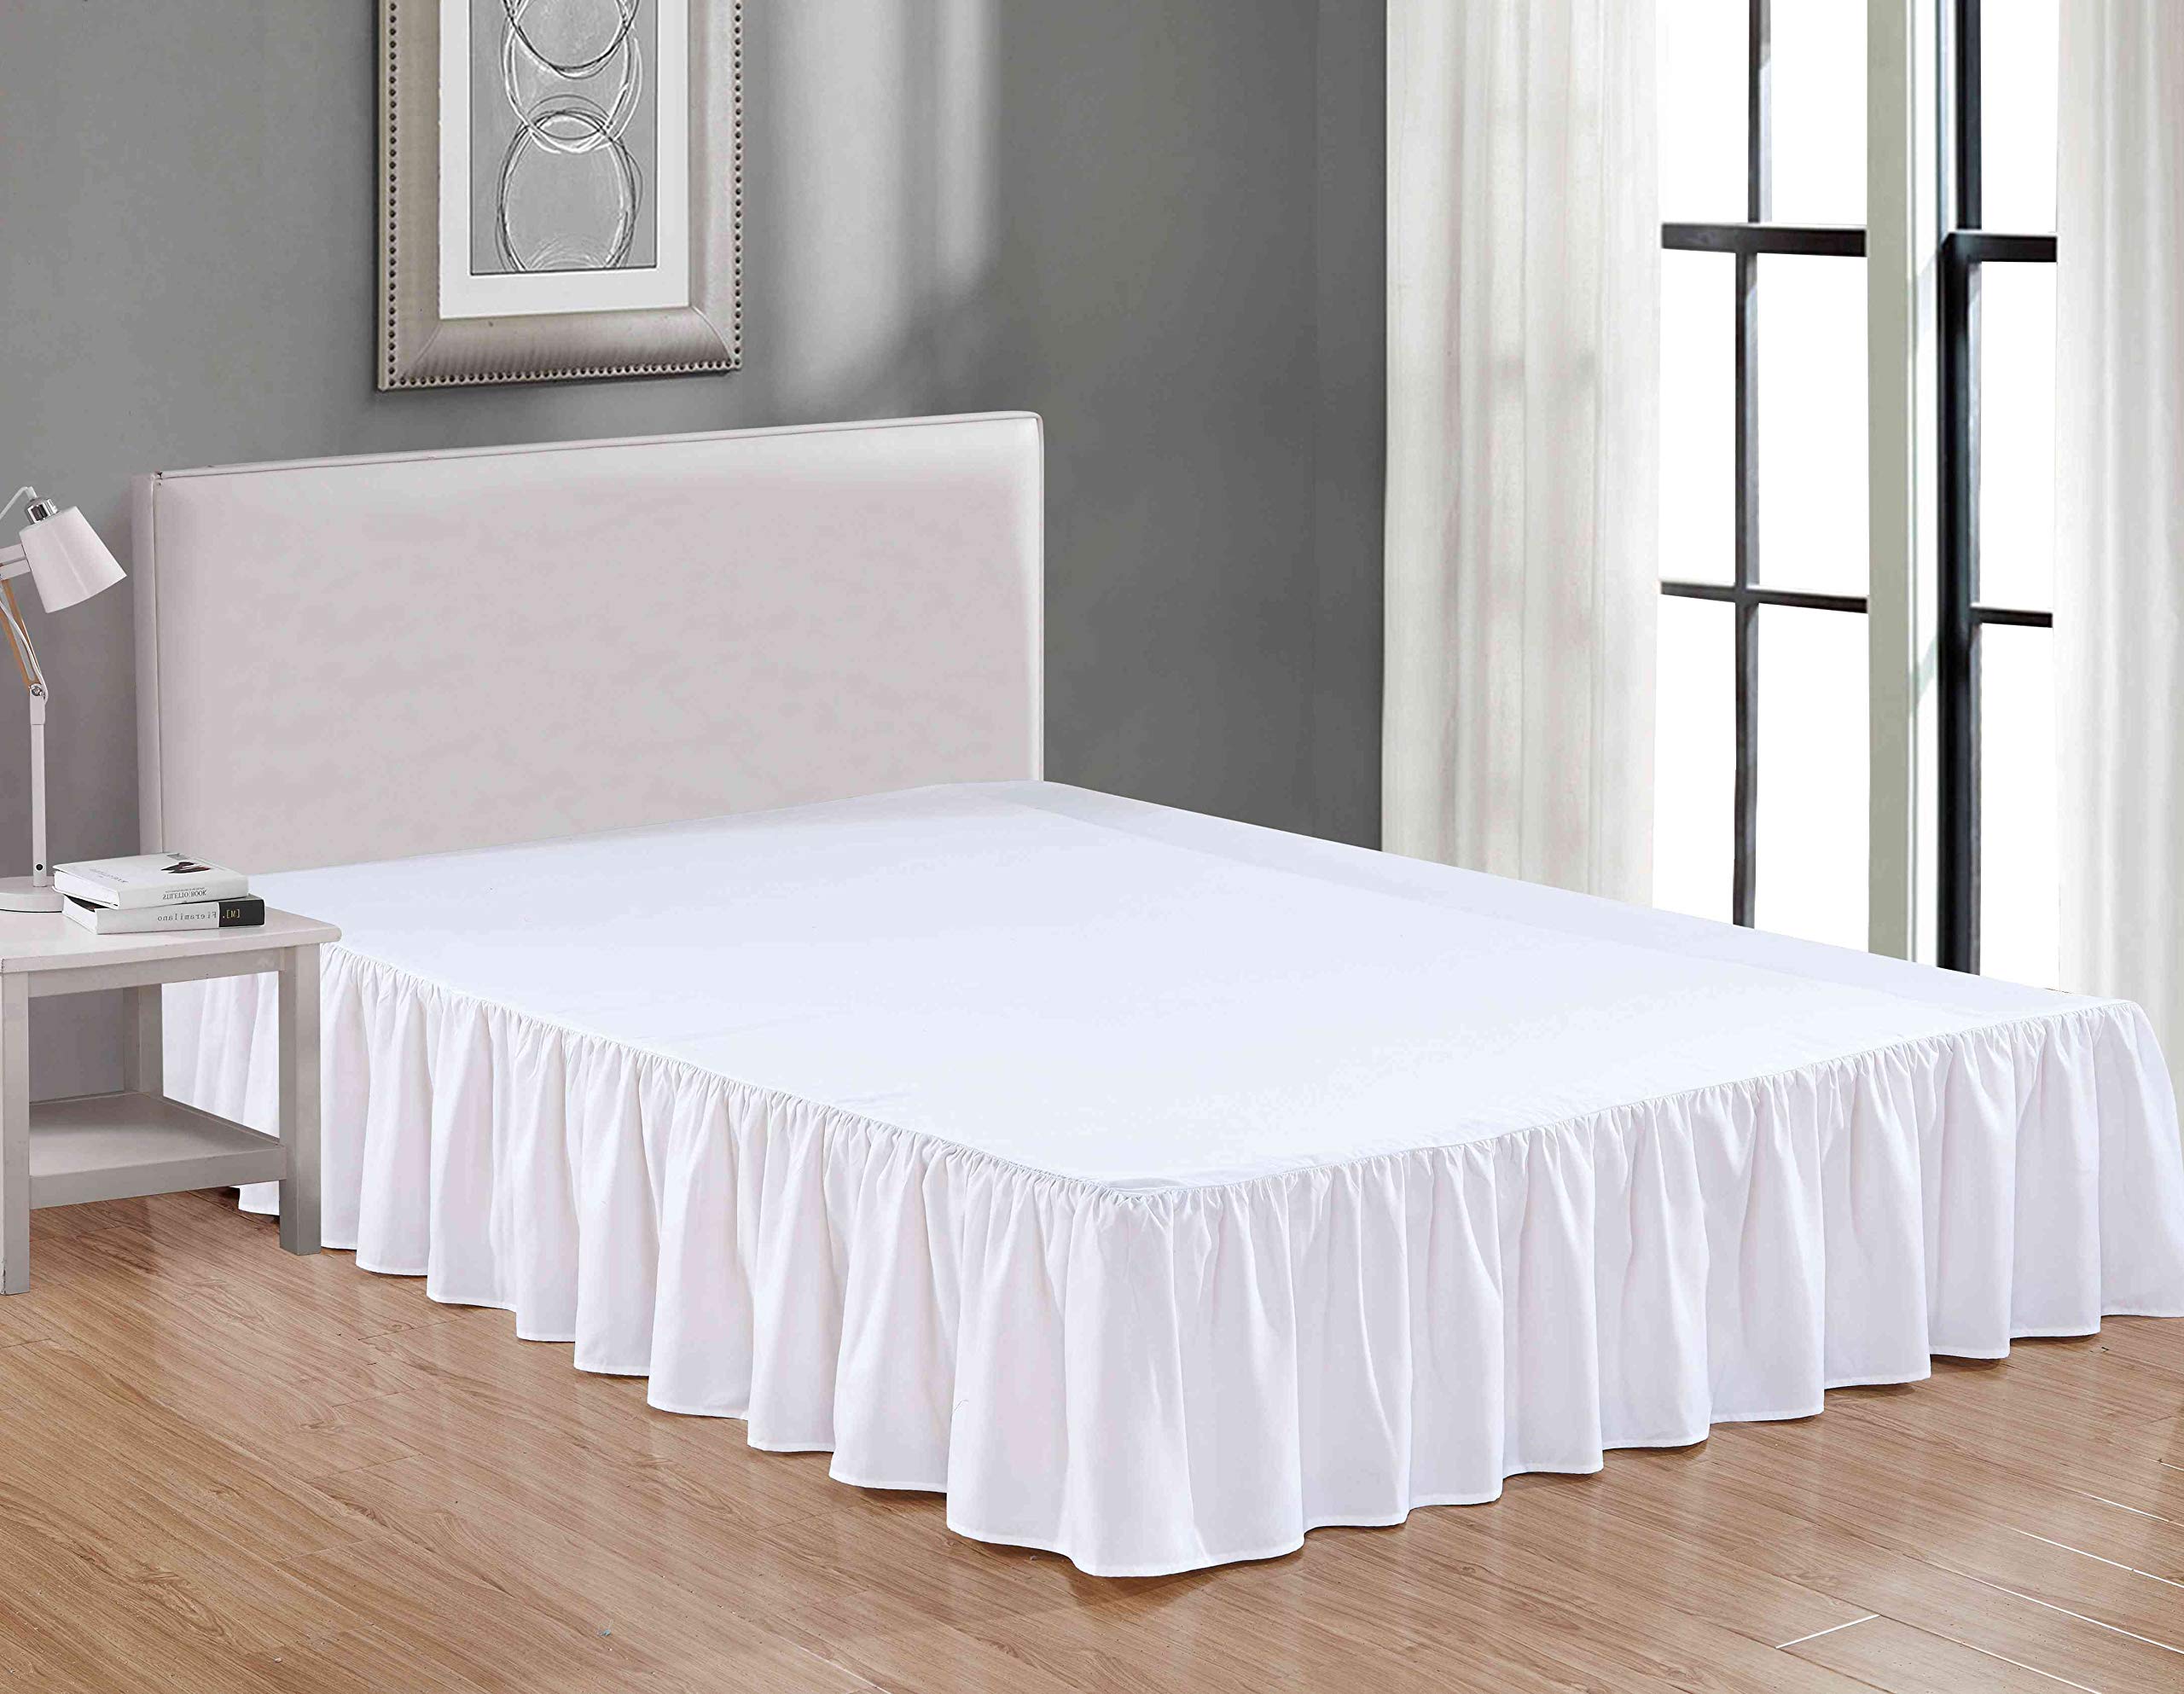 Book Cover Sheets & Beyond Wrap Around Solid Microfiber Luxury Hotel Quality Fabric Bedroom Gathered Ruffled Bedding Bed Skirt 14 Inch Drop (Full, White) Full White